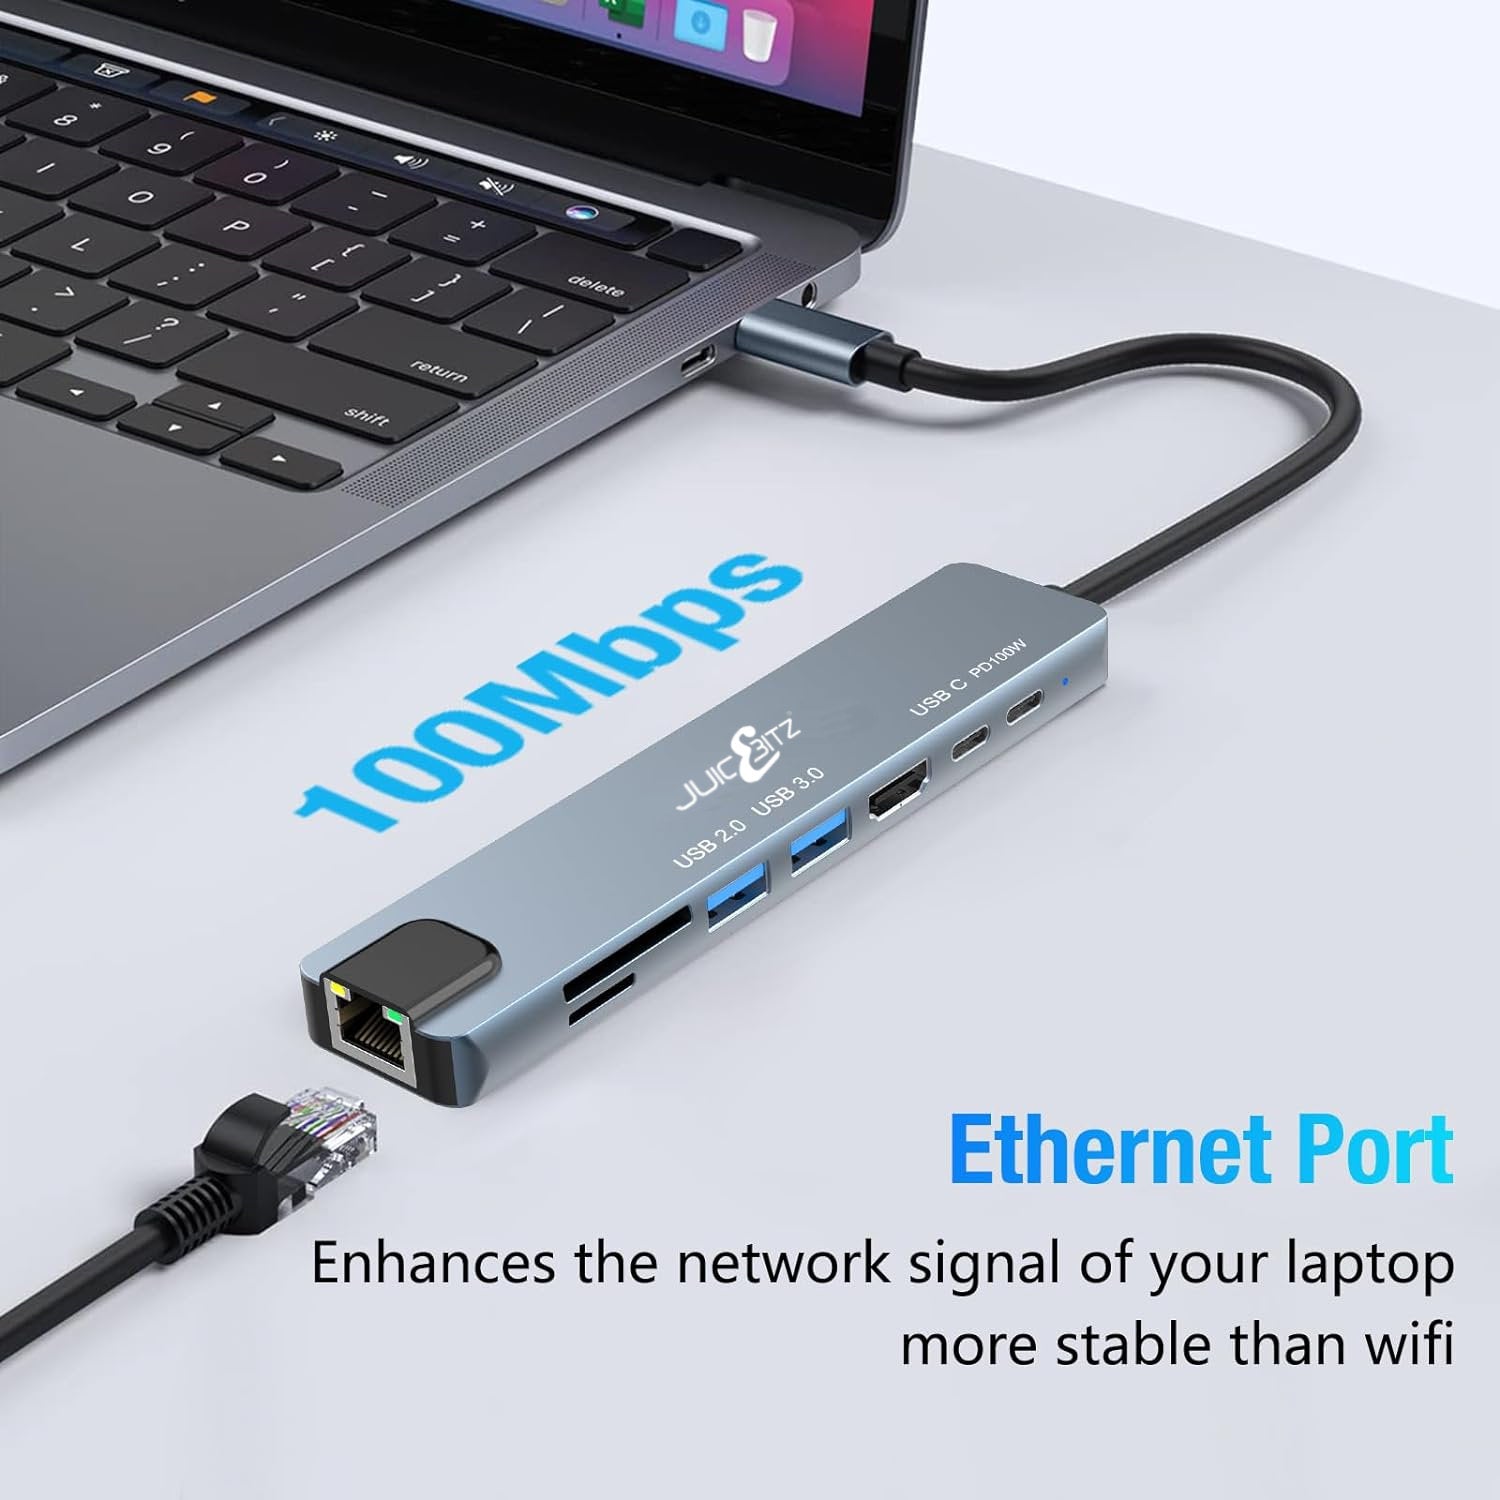 4K USB-C Adapter 8 in 1 HDMI Female USB3.0 USB-C Card Reader PD Output